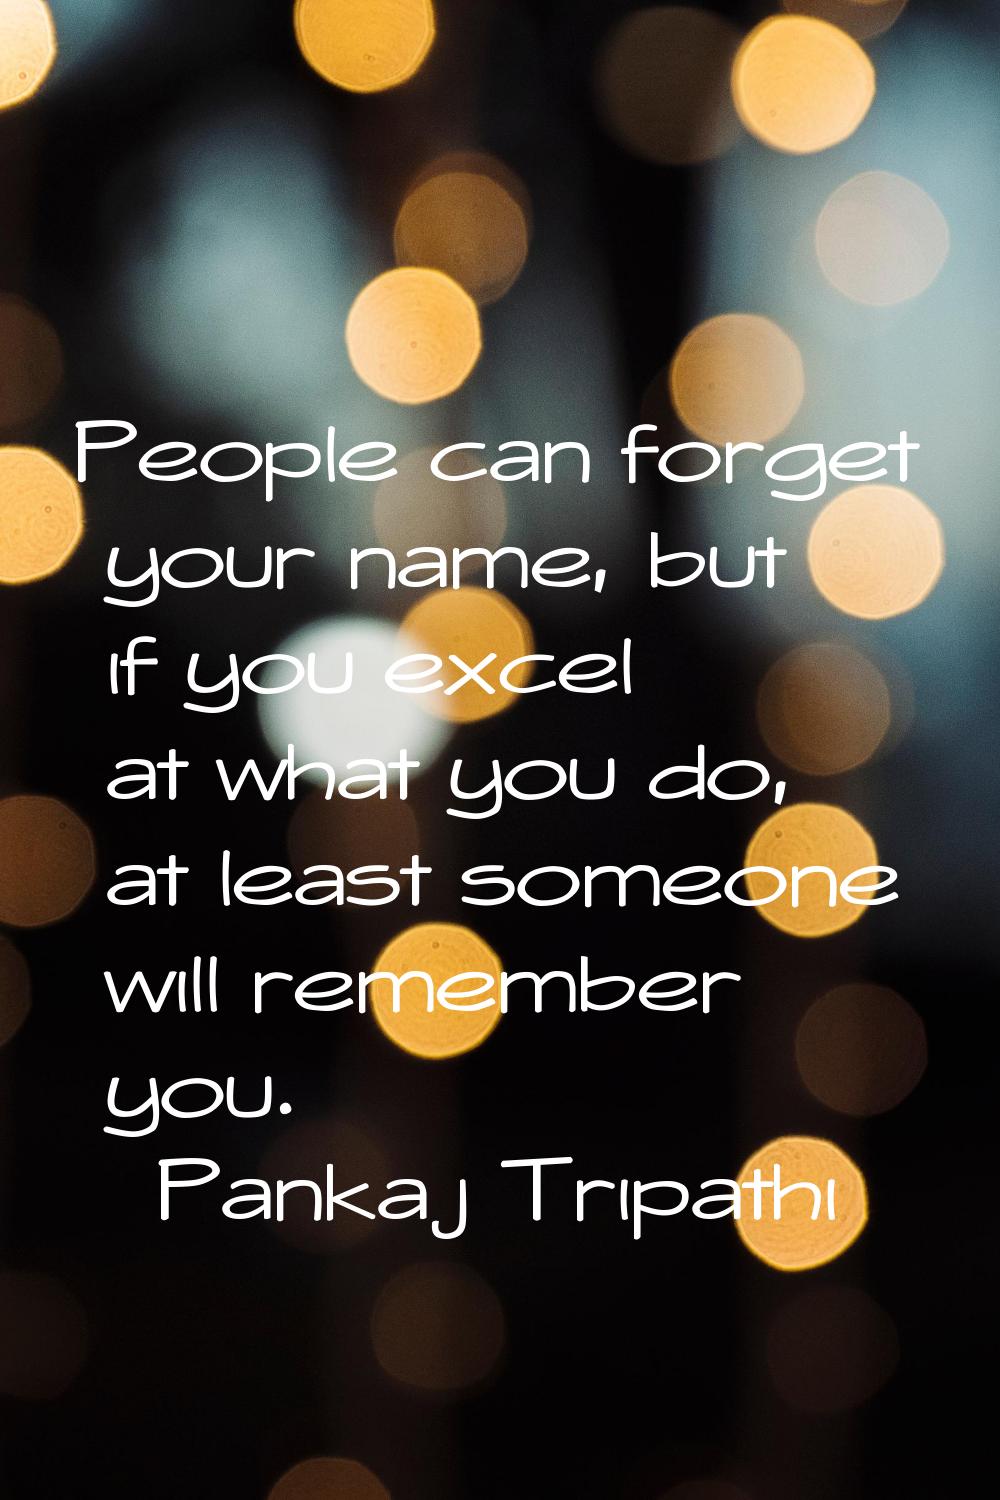 People can forget your name, but if you excel at what you do, at least someone will remember you.